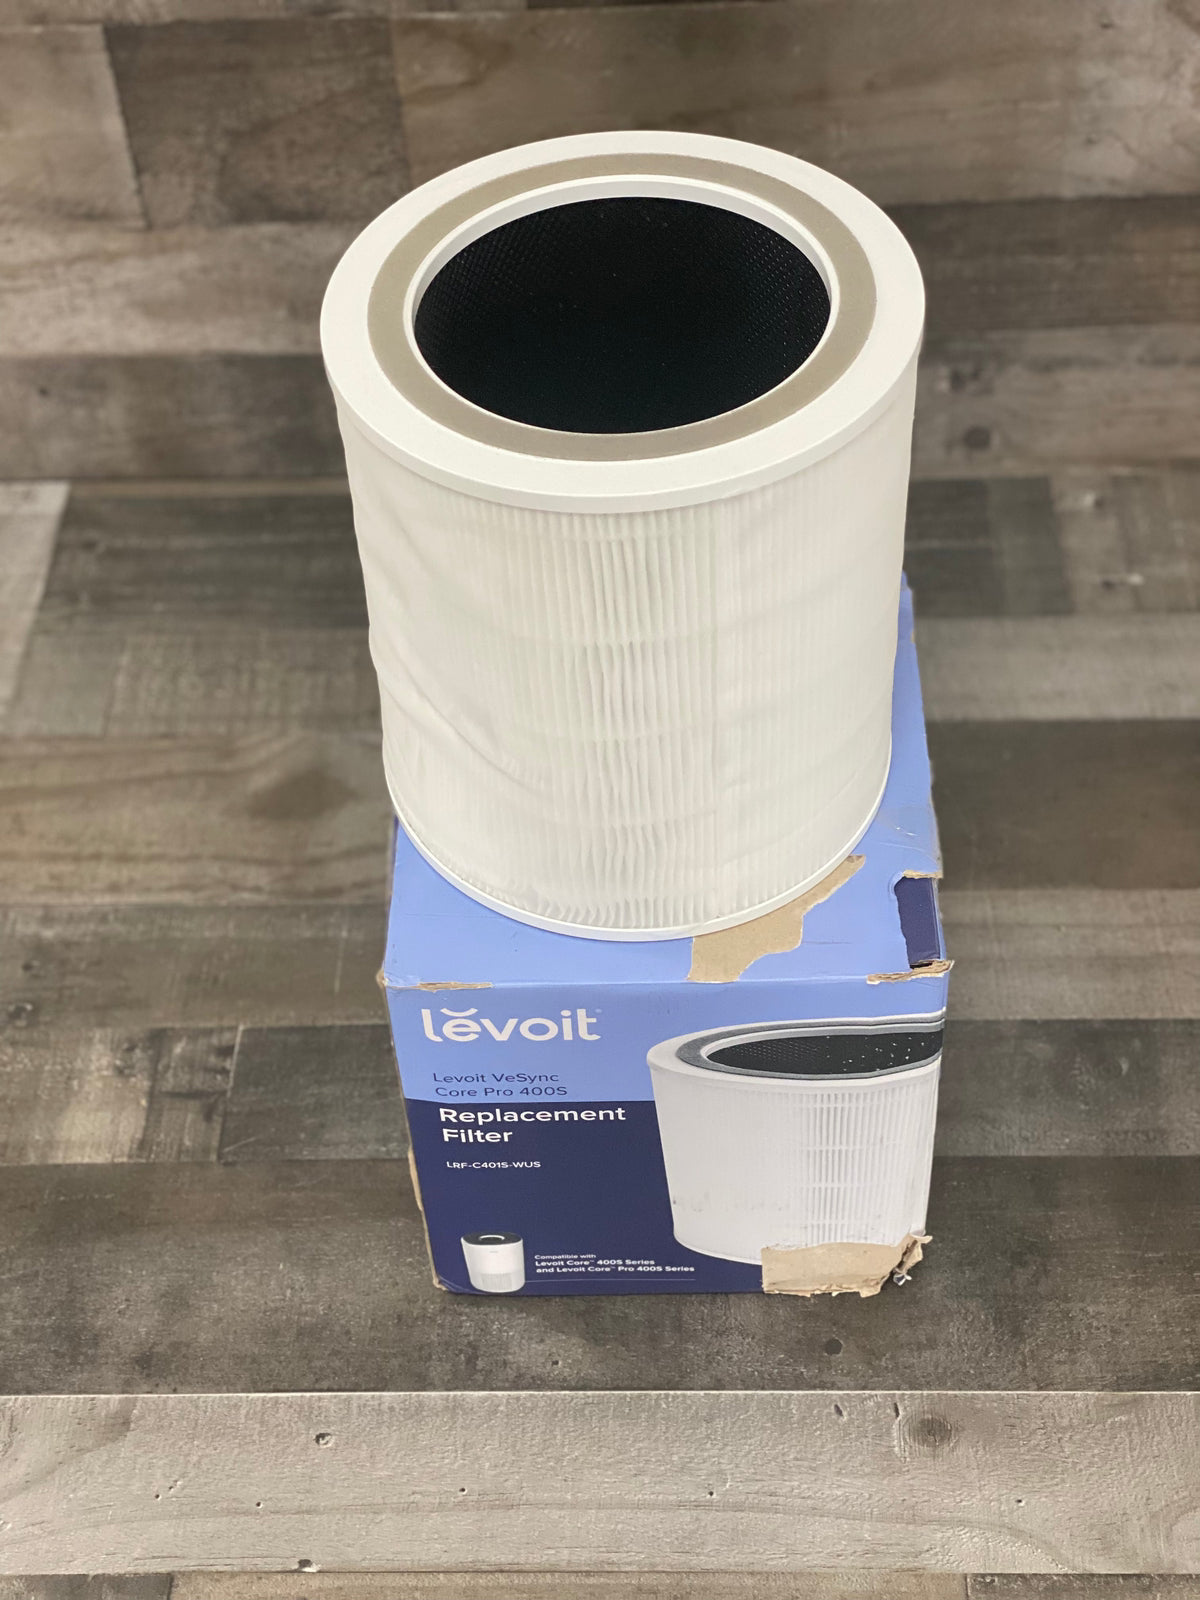 Core 400s Filter Replacement For Levoit Compatible With Levoit Core 400s Smart Wifi Air Puri-Fier, Core400s-Rf,True H13 Hepa Filter and Activated Carbon